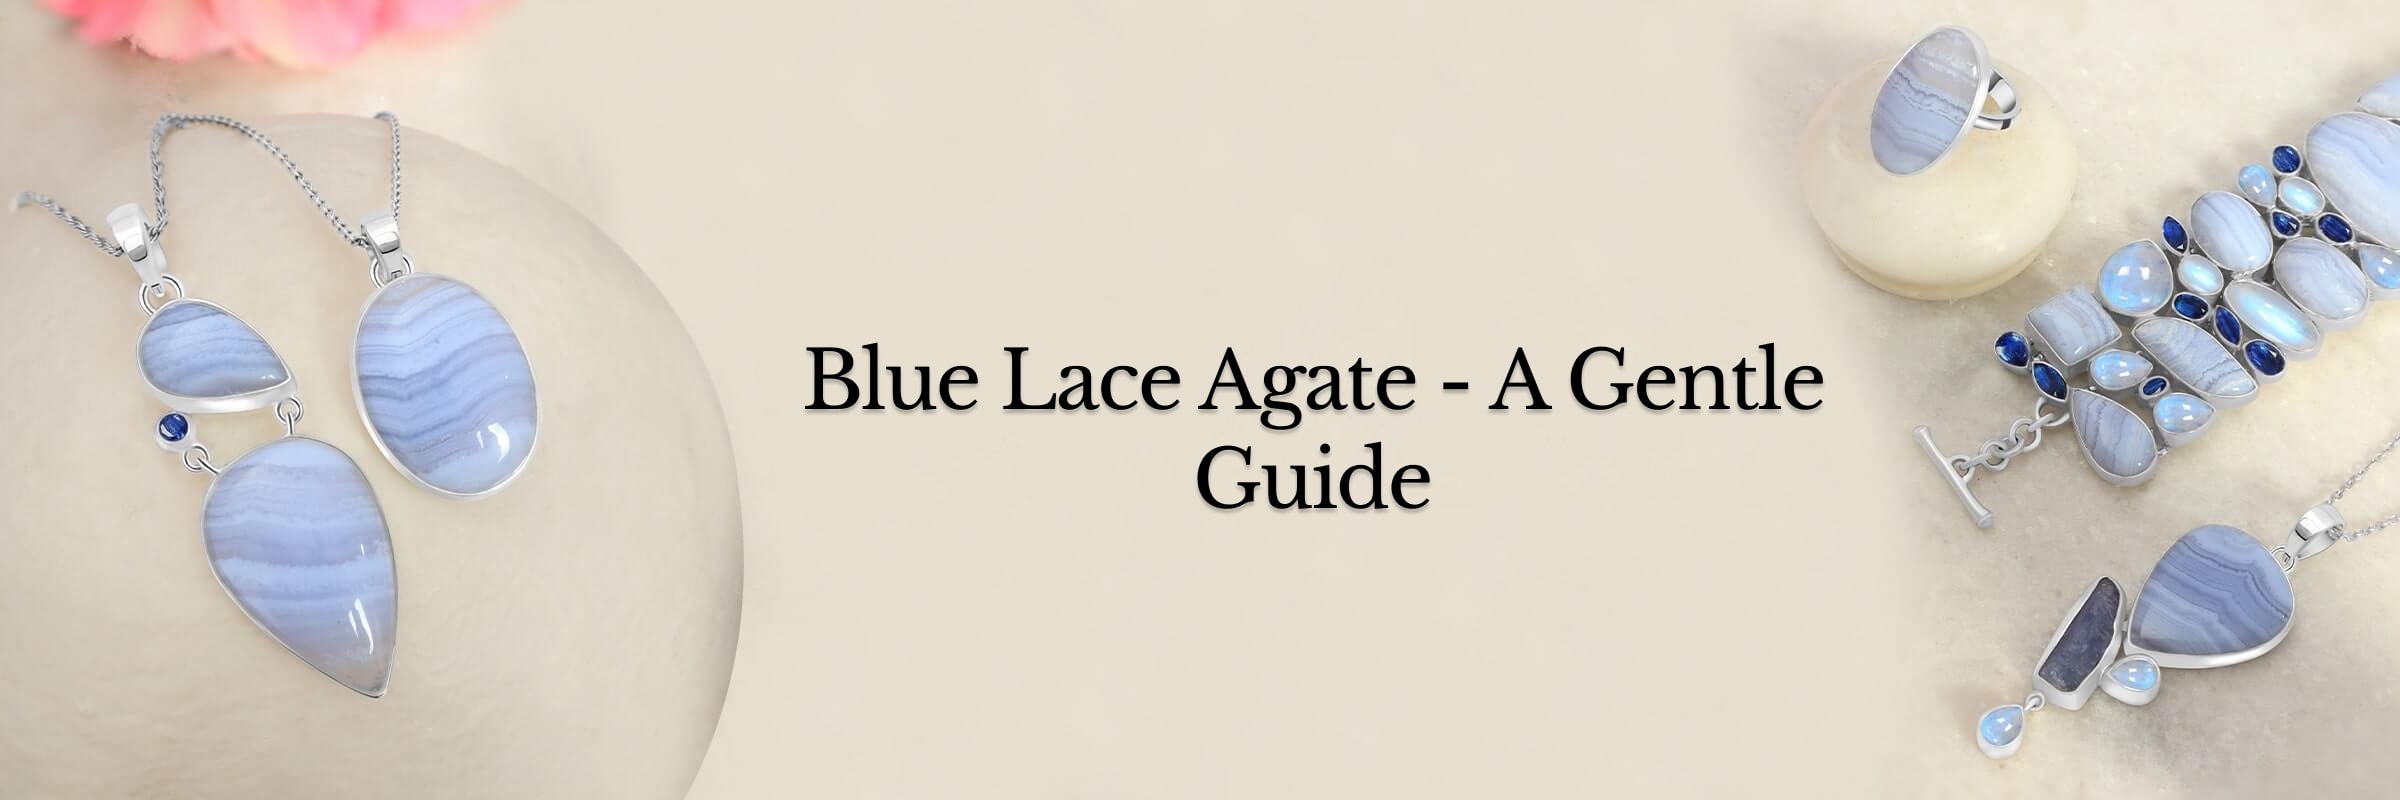 How to use blue lace agate